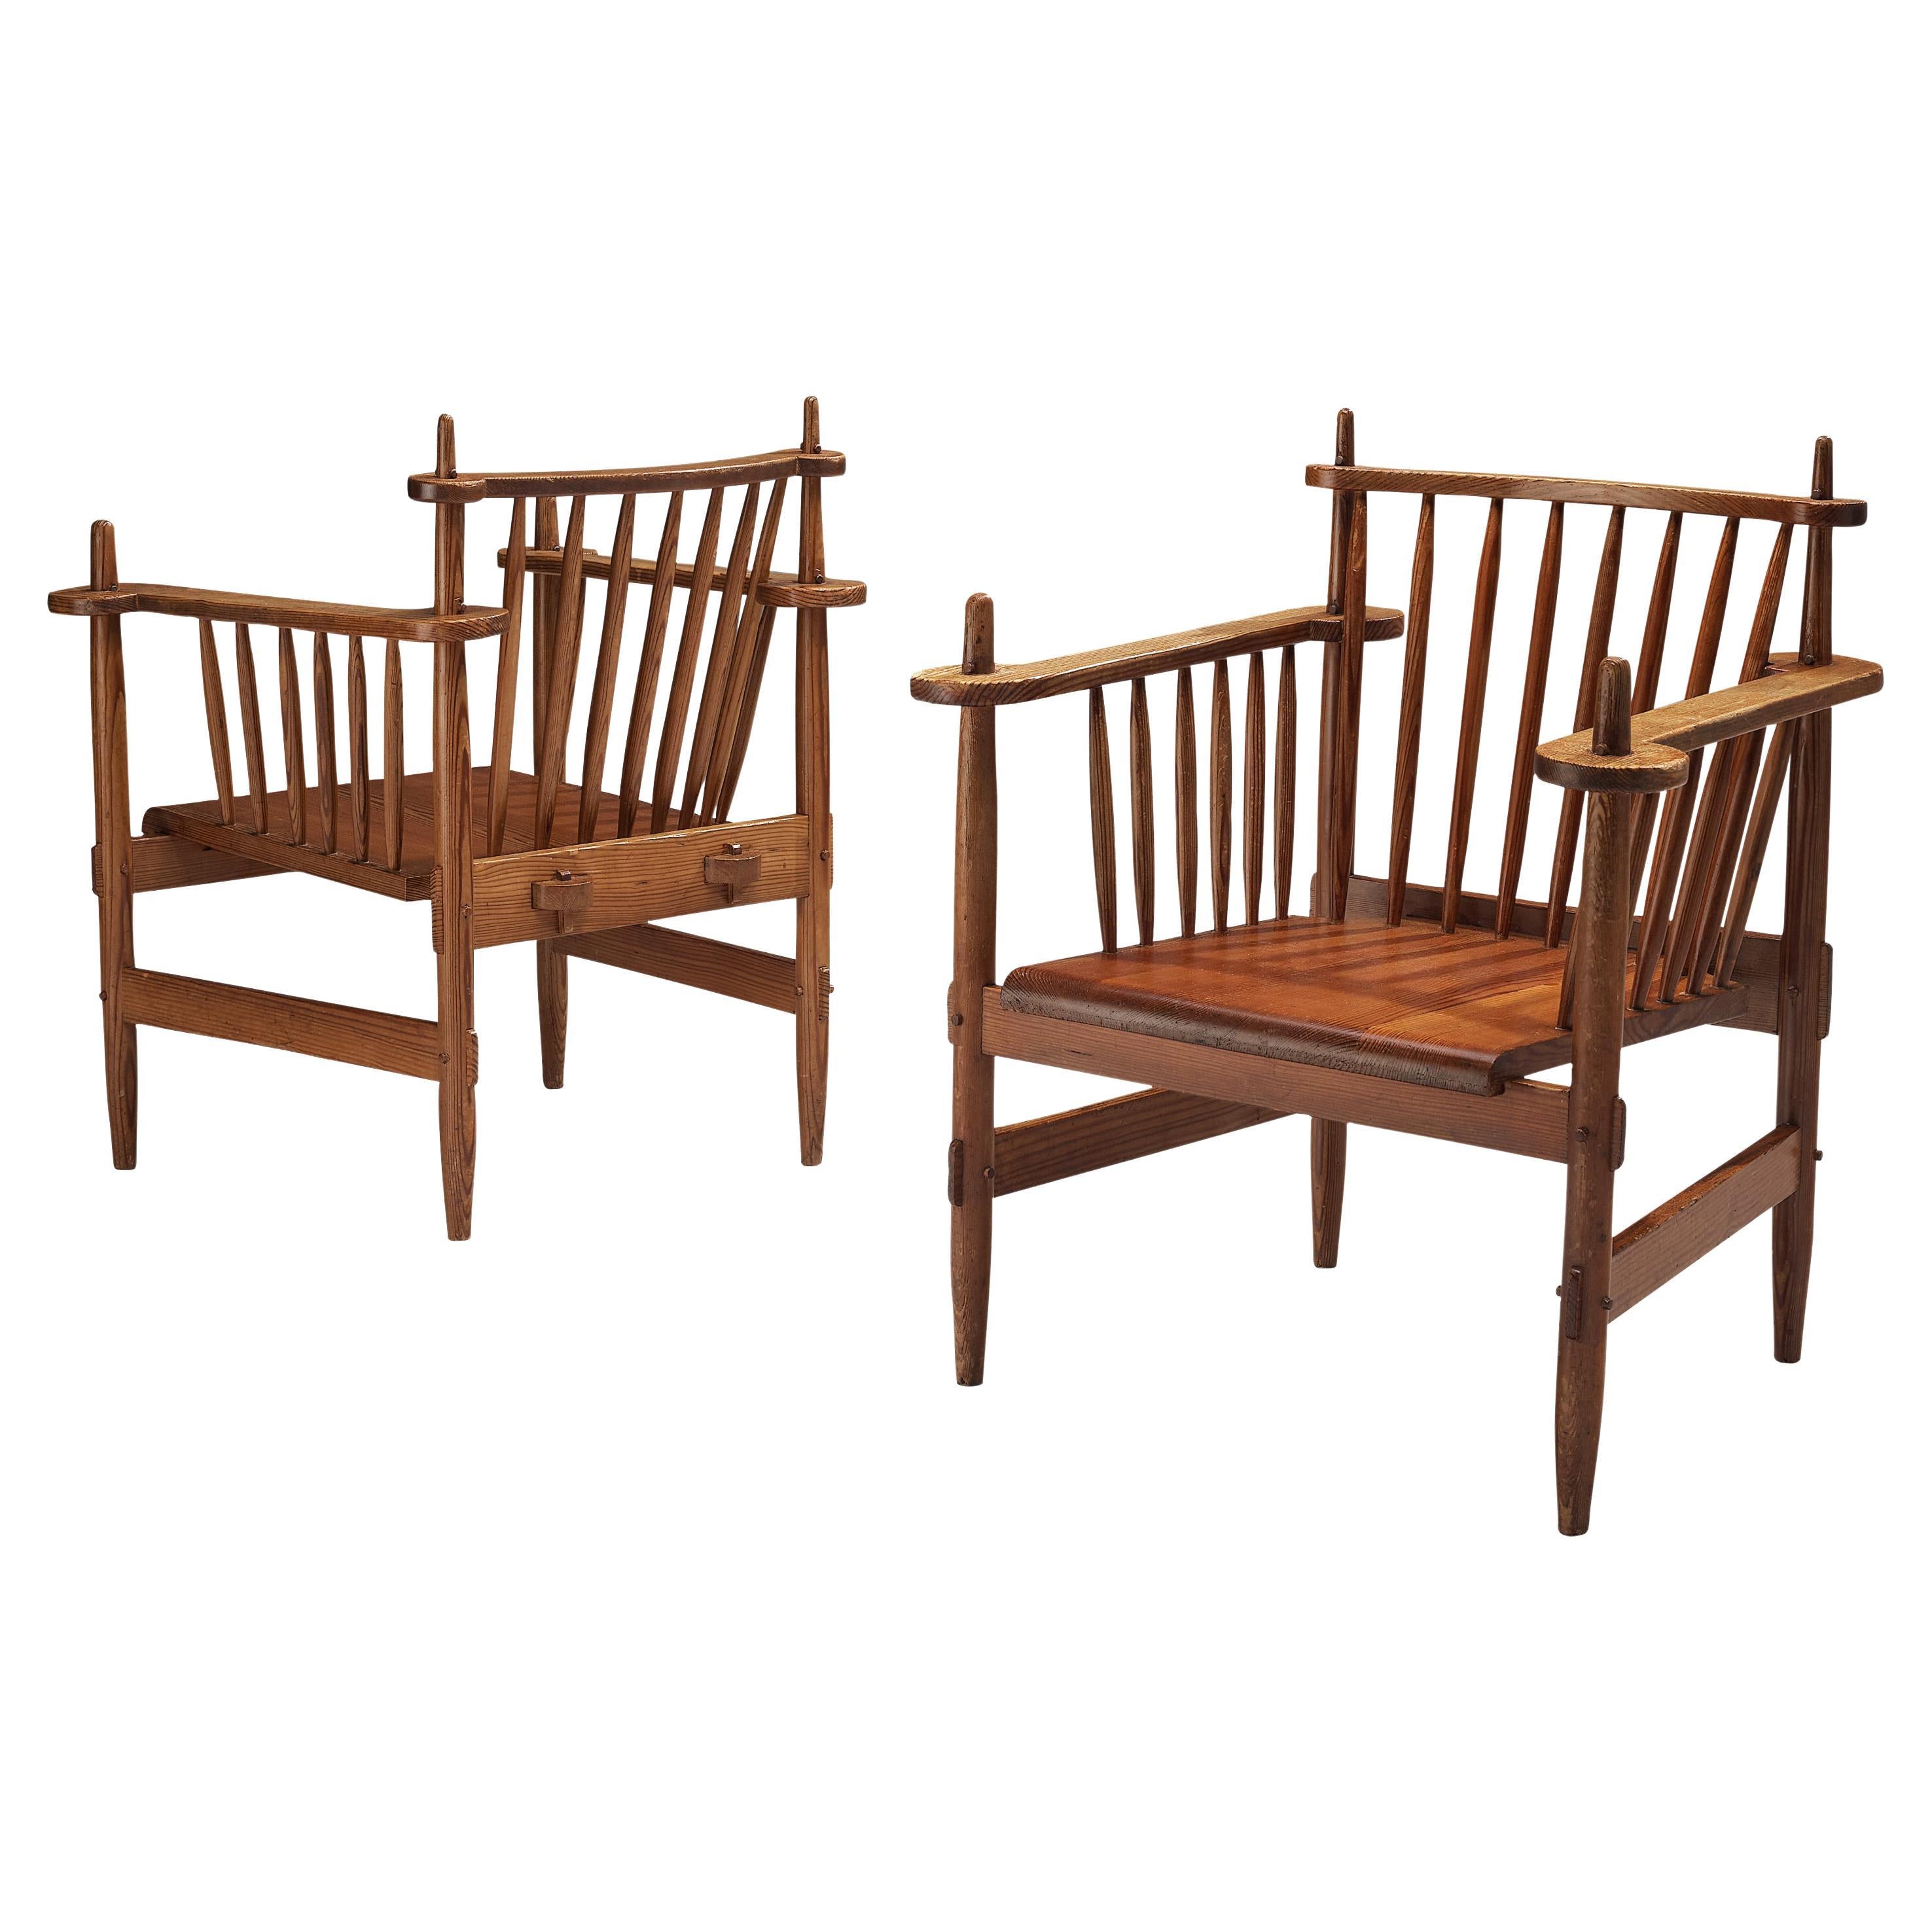 Dutch Pair of Rustic Armchairs in Solid Pine